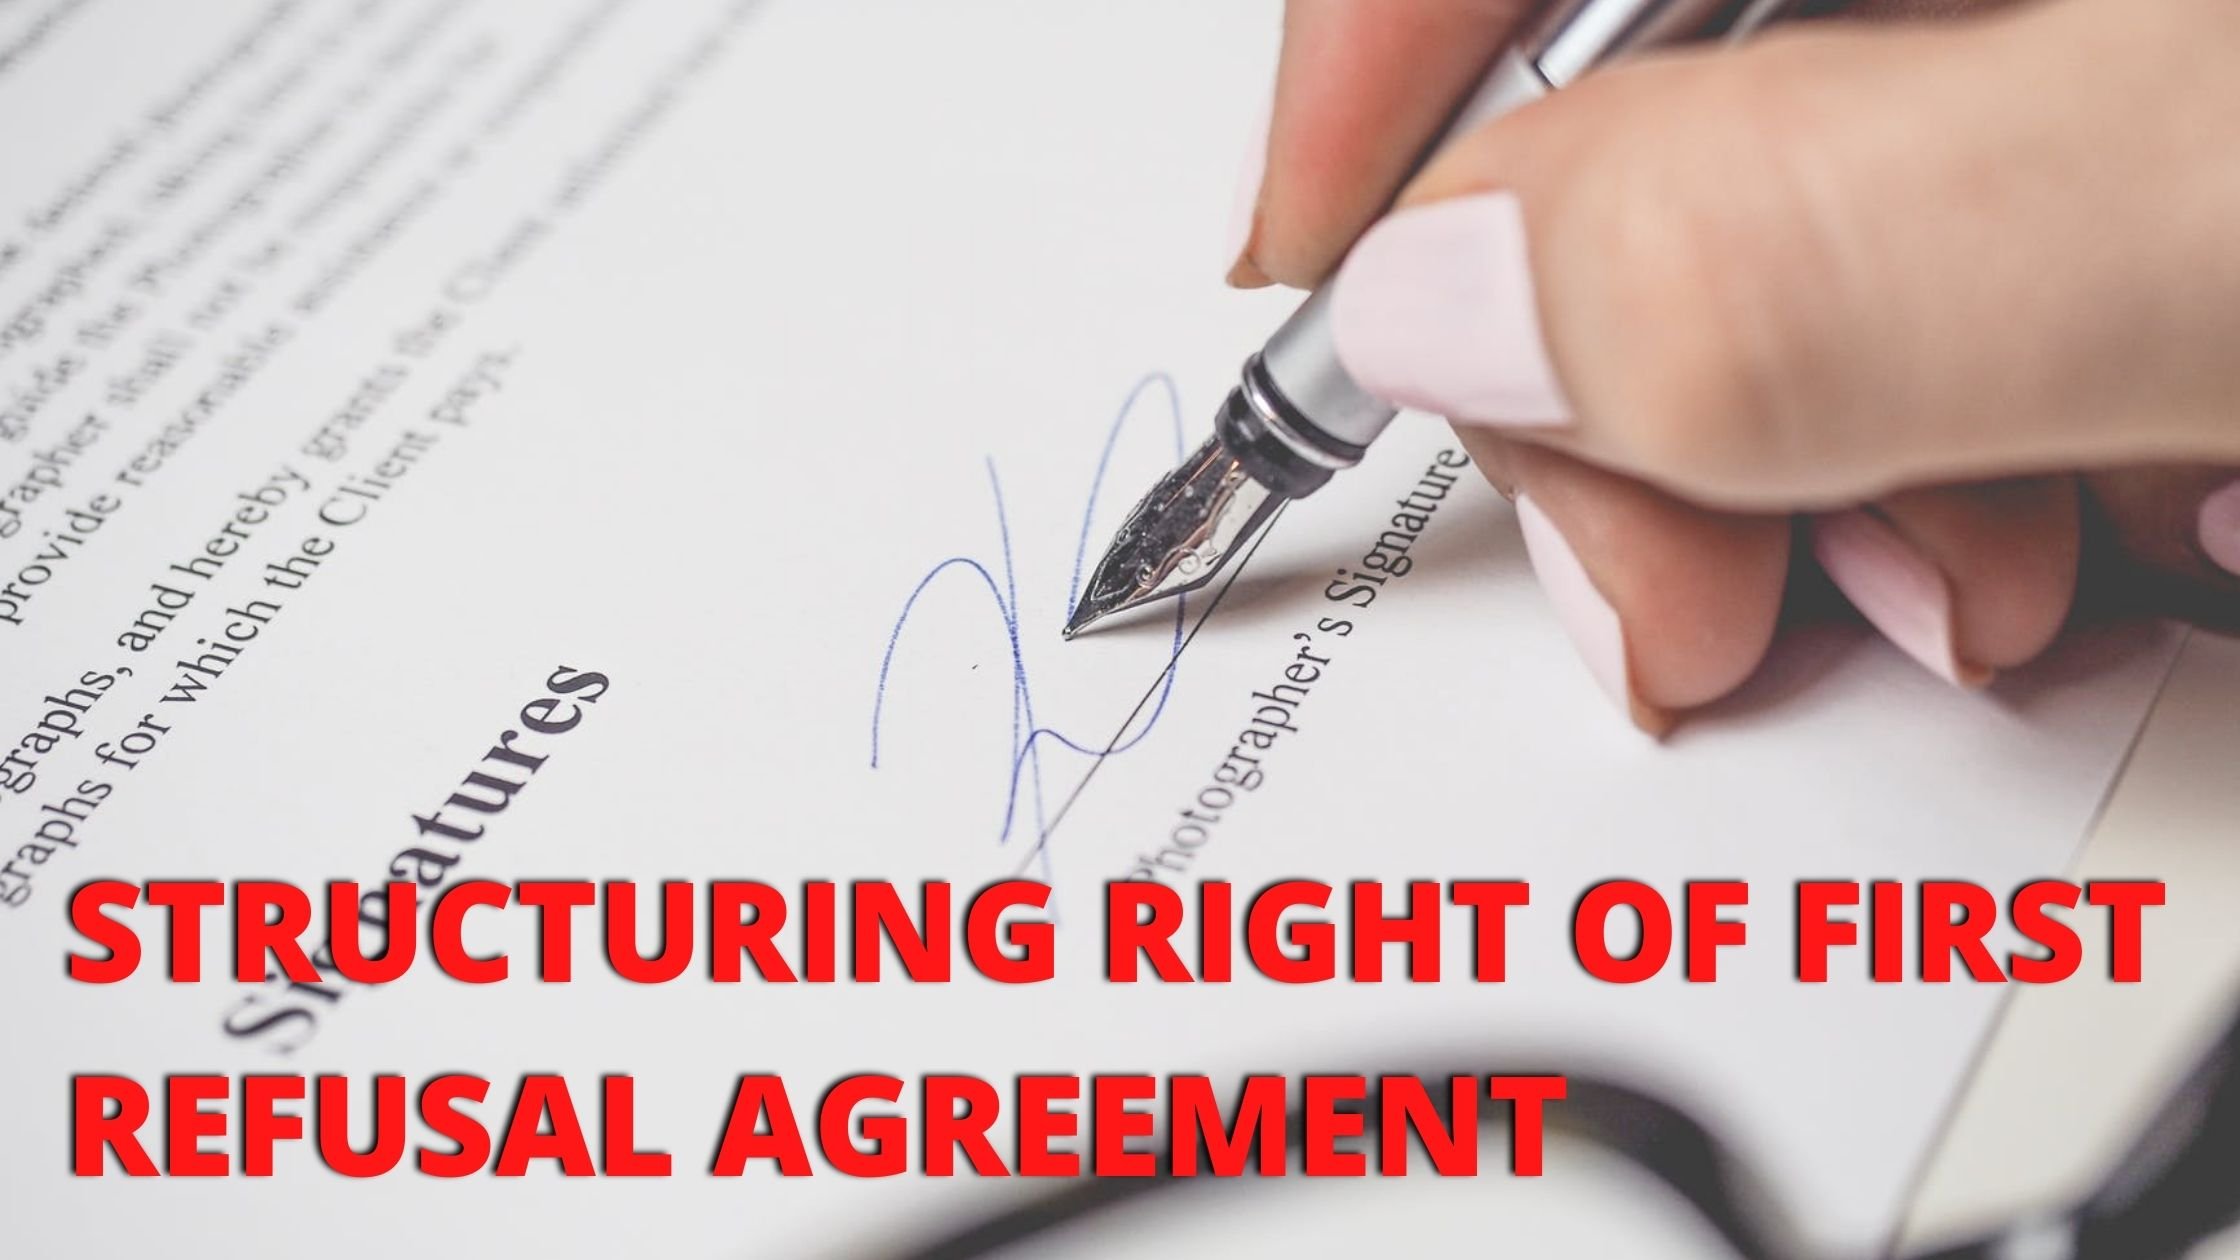 STRUCTURING A RIGHT OF FIRST REFUSAL AGREEMENT